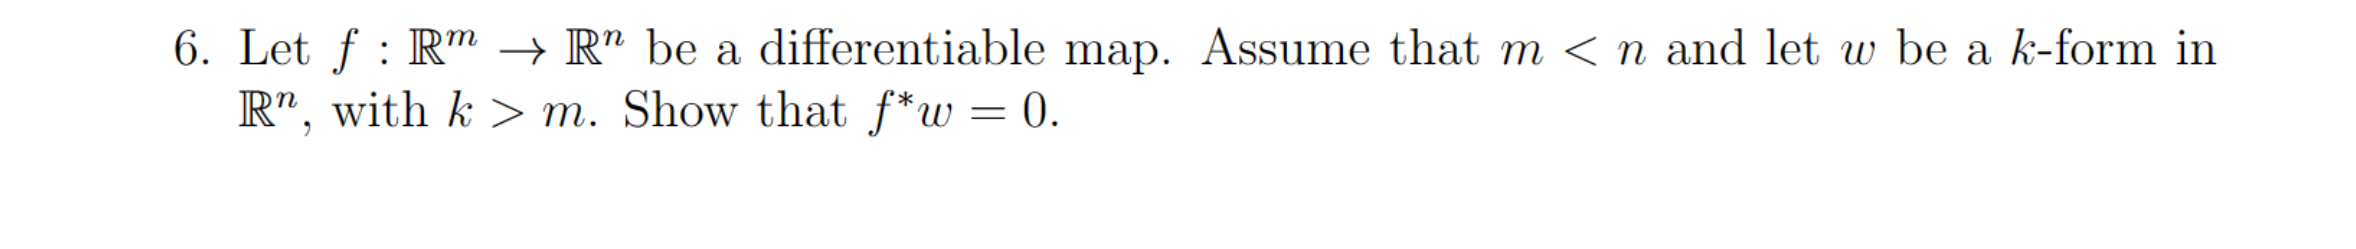 6. Let \( f: \mathbb{R}^{m} \rightarrow \mathbb{R}^{n} \) be a differentiable map. Assume that \( m<n \) and let \( w \) be a